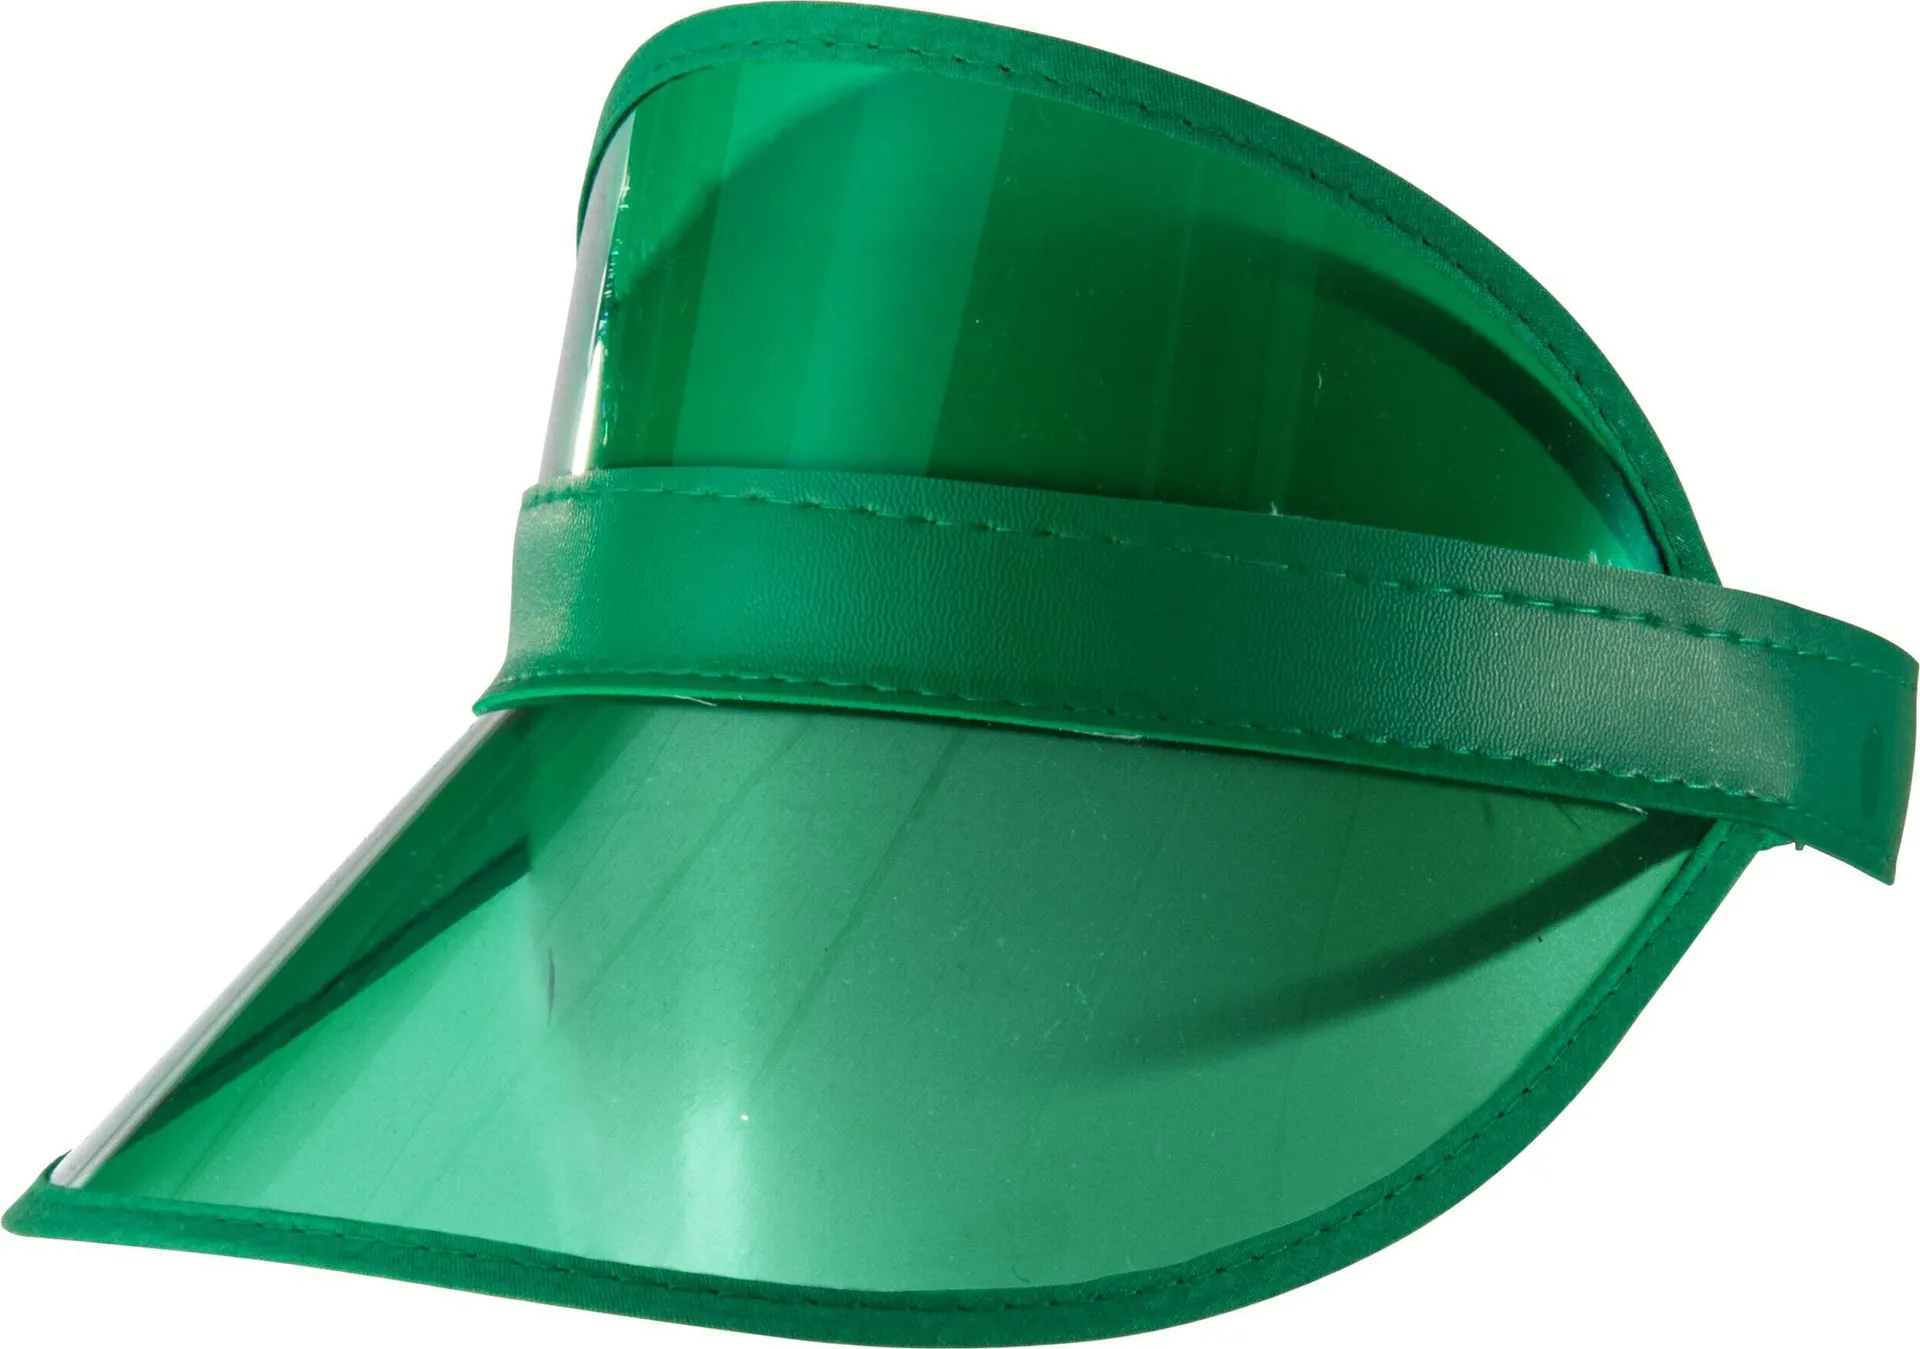 Casino Visor Hat, Green, One Size, Wearable Costume Accessory for Halloween